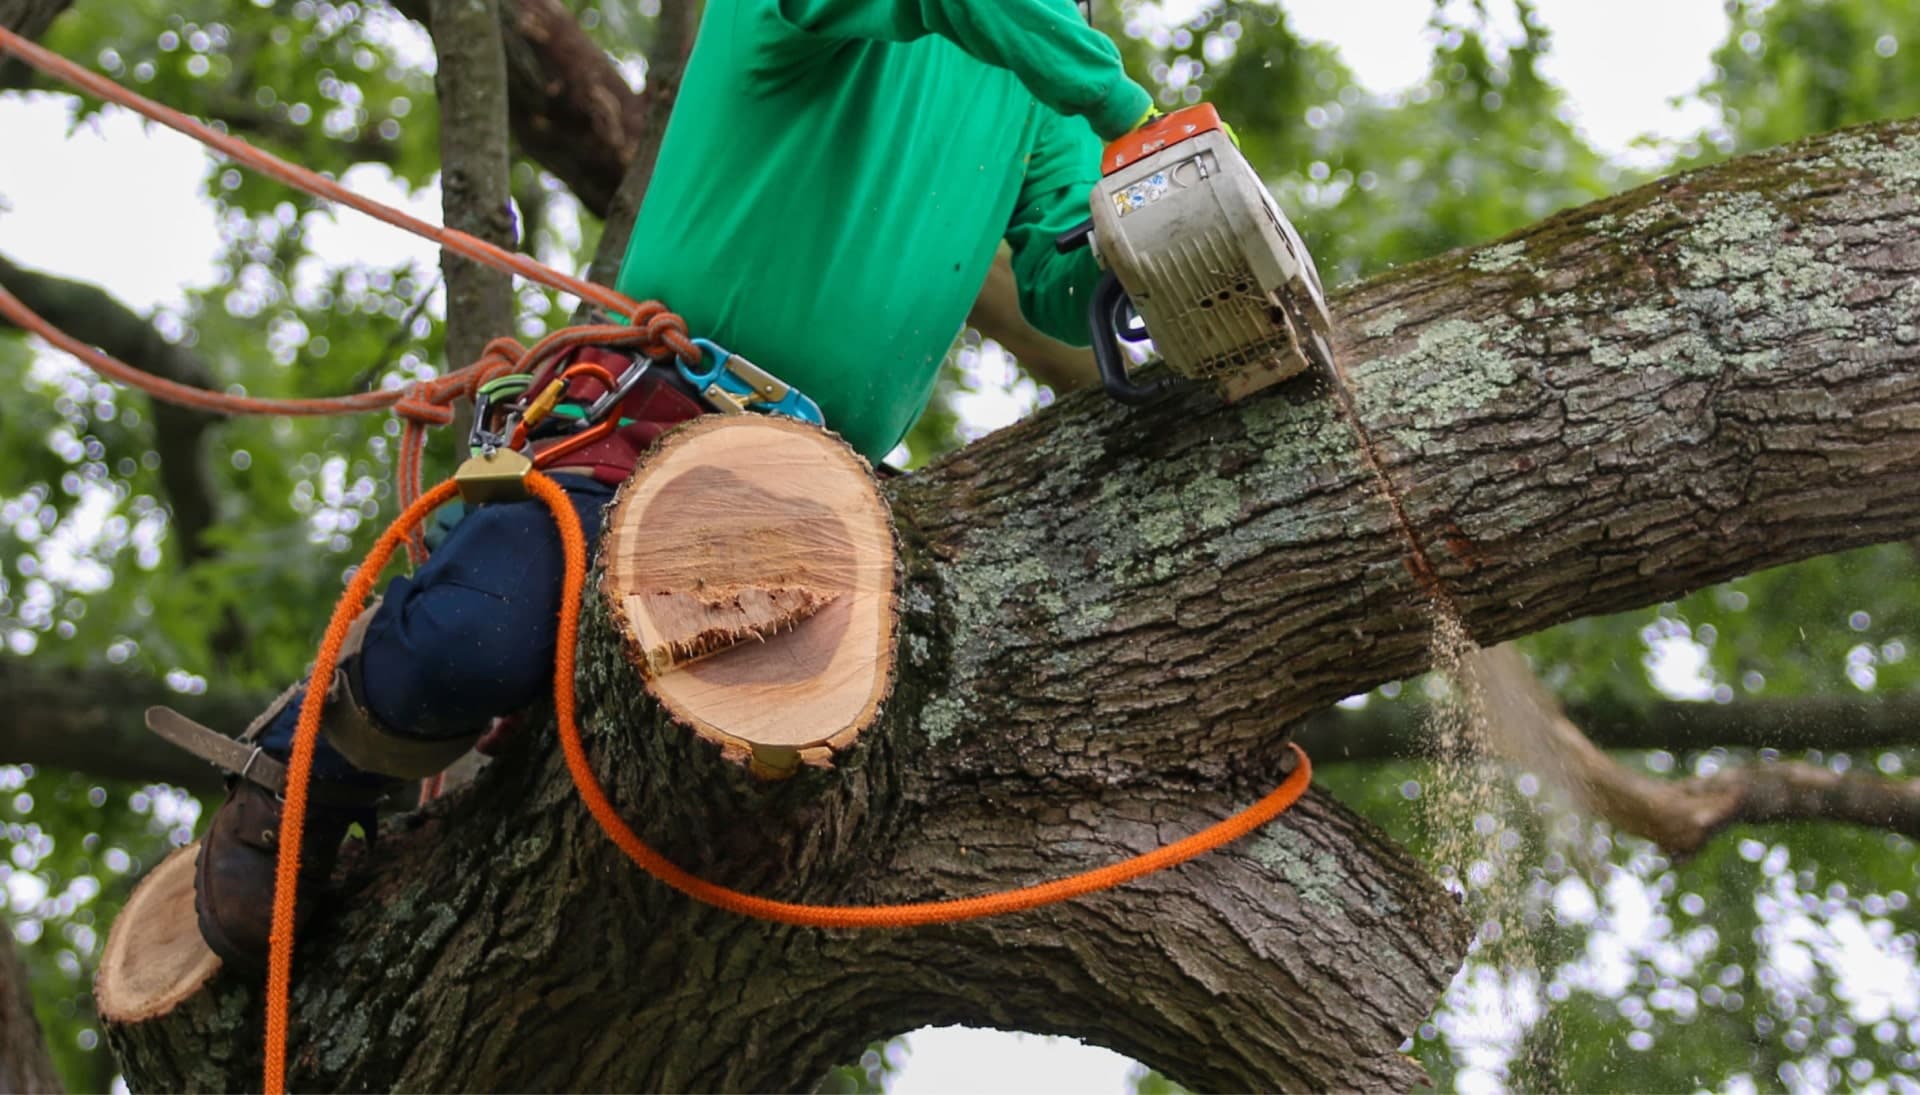 Shed your worries away with best tree removal in Katy